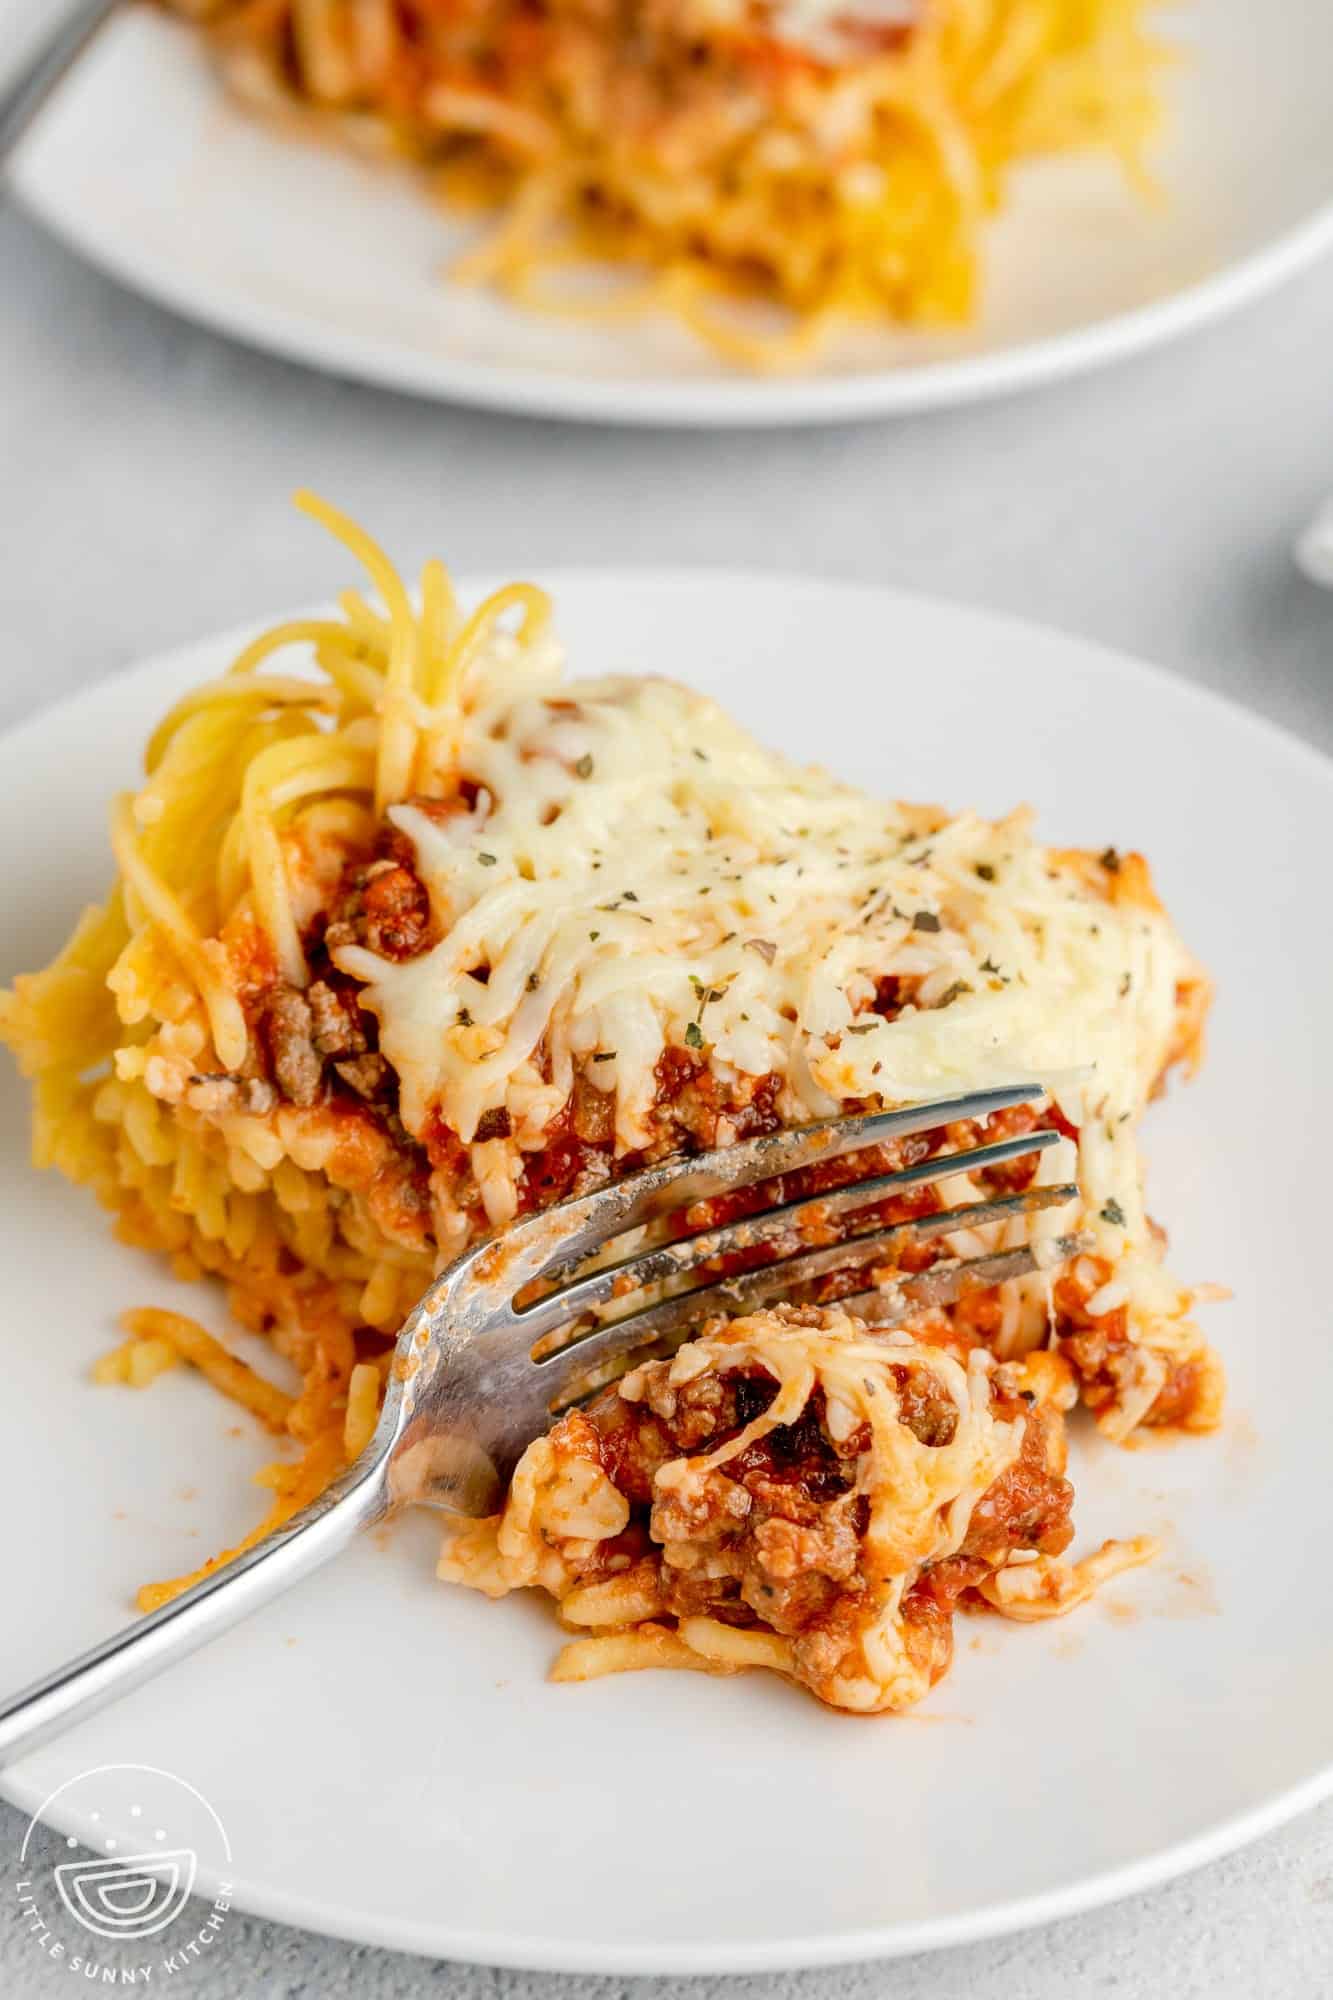 a serving of spaghetti pie on a dinner plate. A fork is picking up a bite.